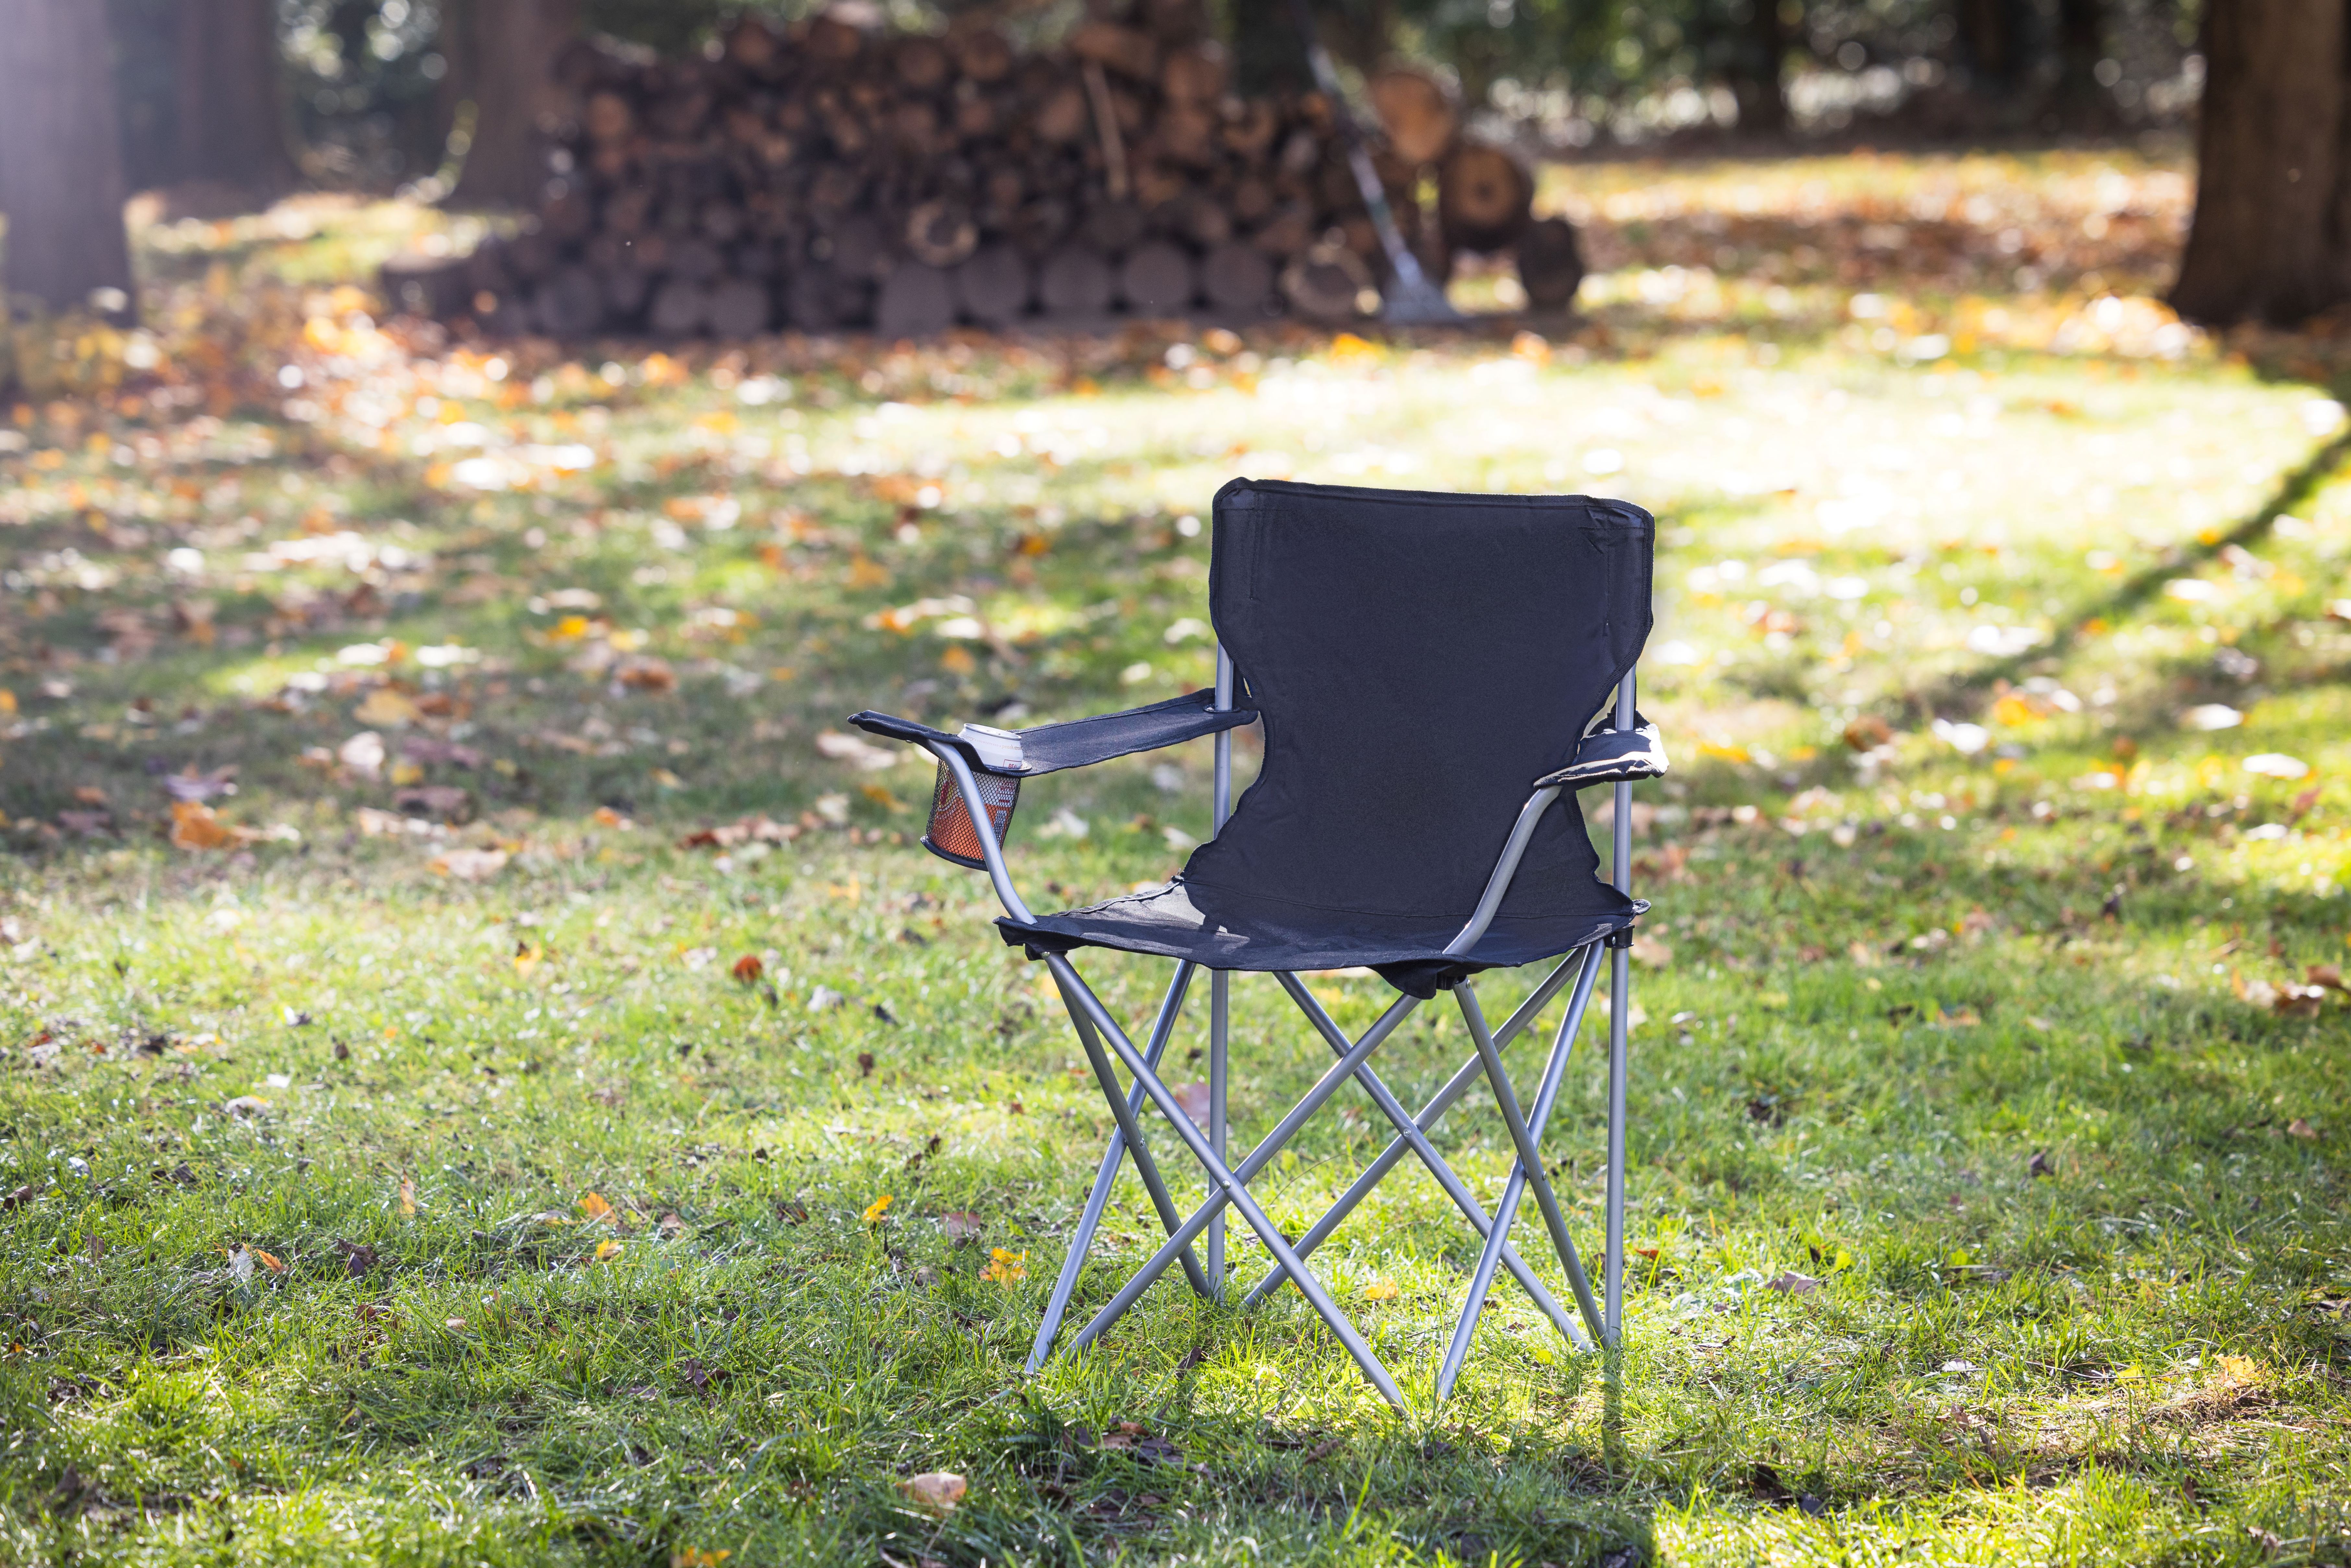 Ozark Trail Adult Basic Quad Folding Camp Chair with Cup Holder, Black - image 11 of 13